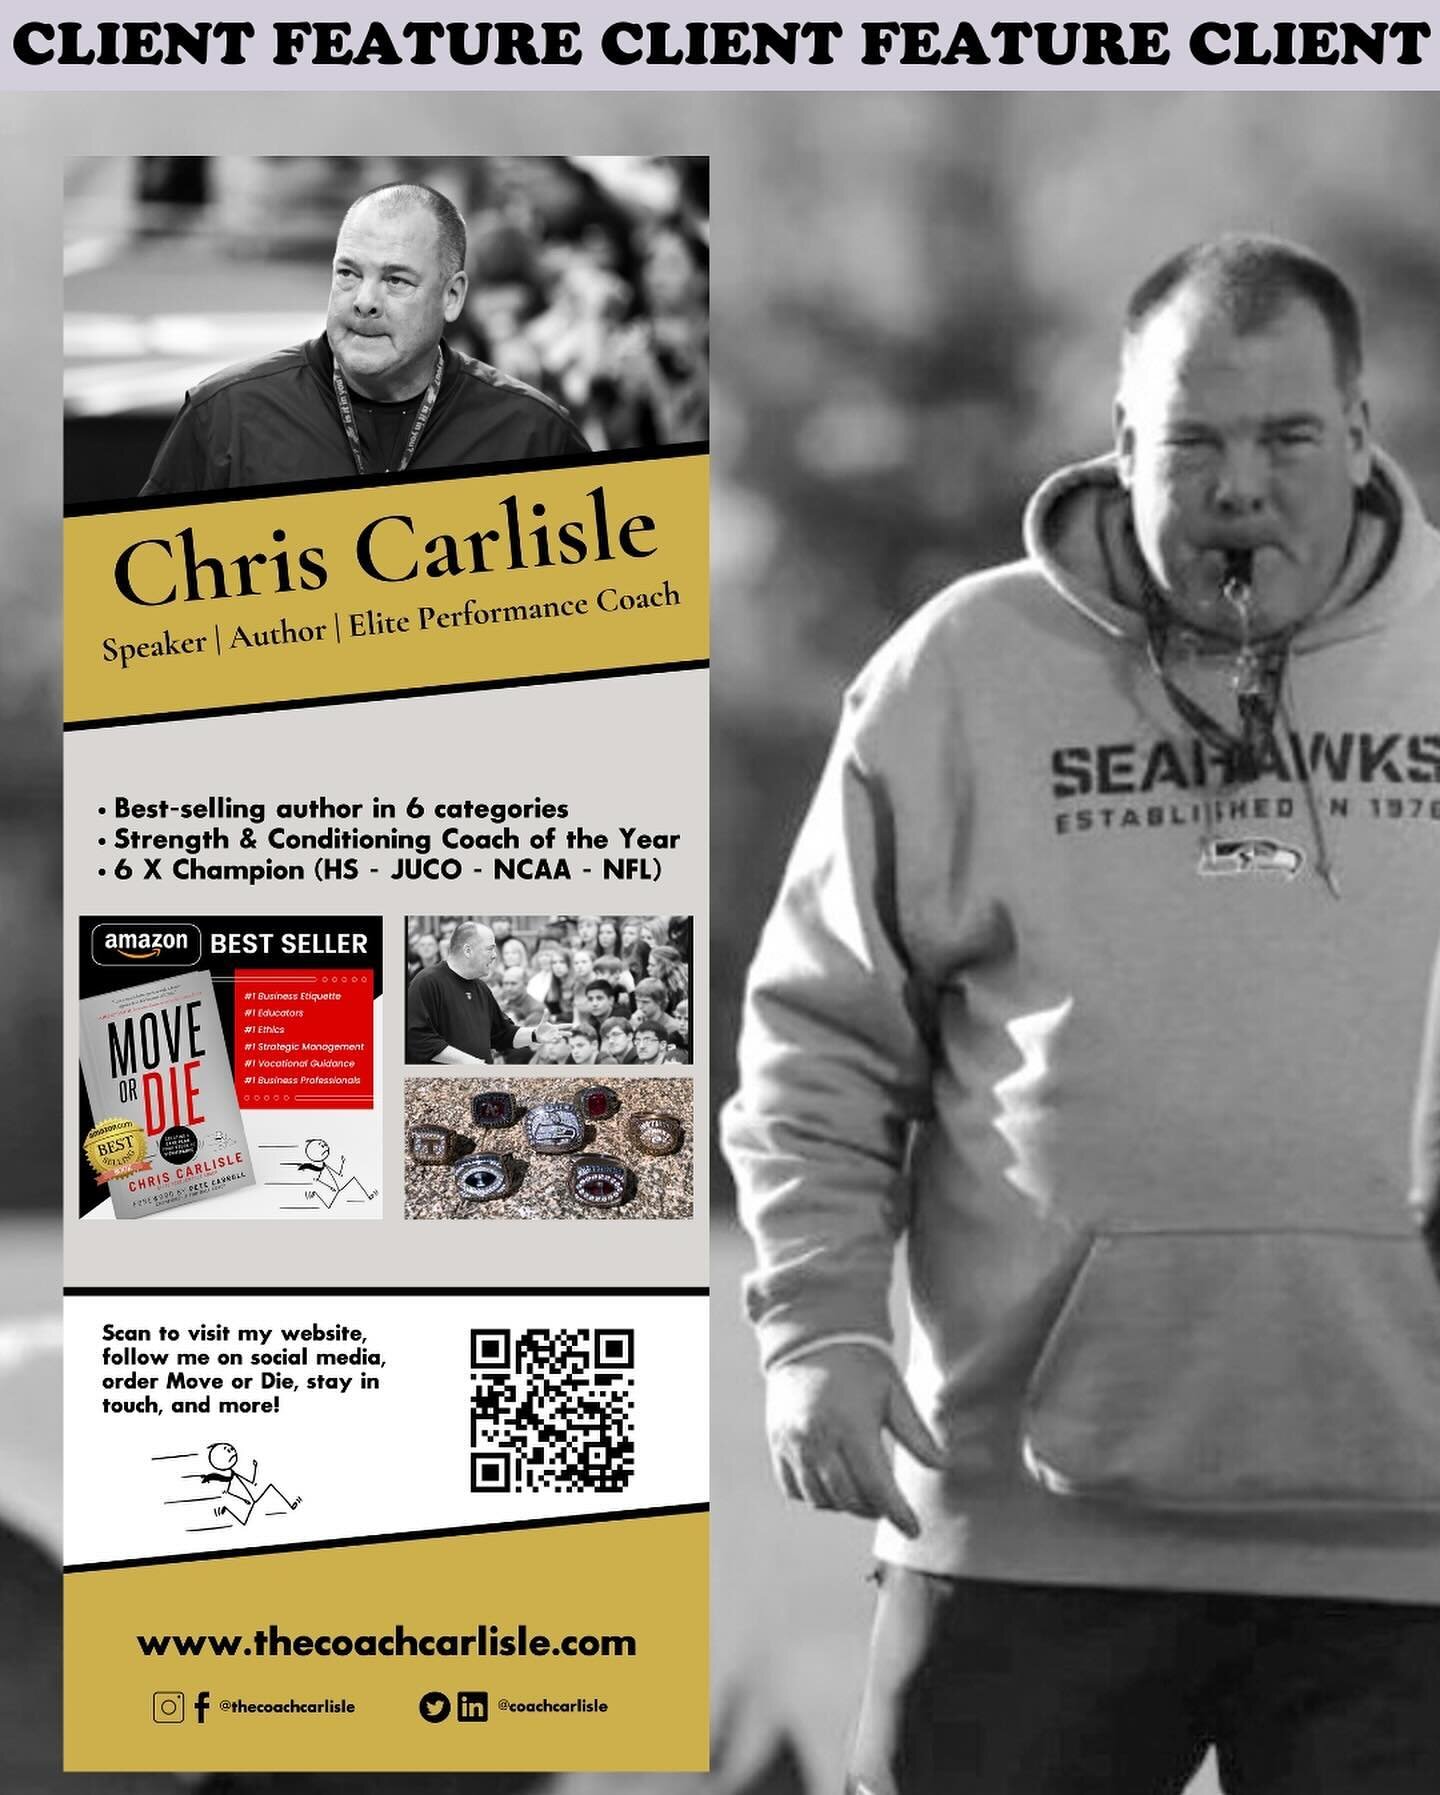 It&rsquo;s been super fun to work on big print projects recently! Posters, banners, pop-up tents, and more. This one is an awesome 32&rdquo; x 80&rdquo; (yup, bigger-than-life-size!) retractable banner for @thecoachcarlisle to take to book signings a